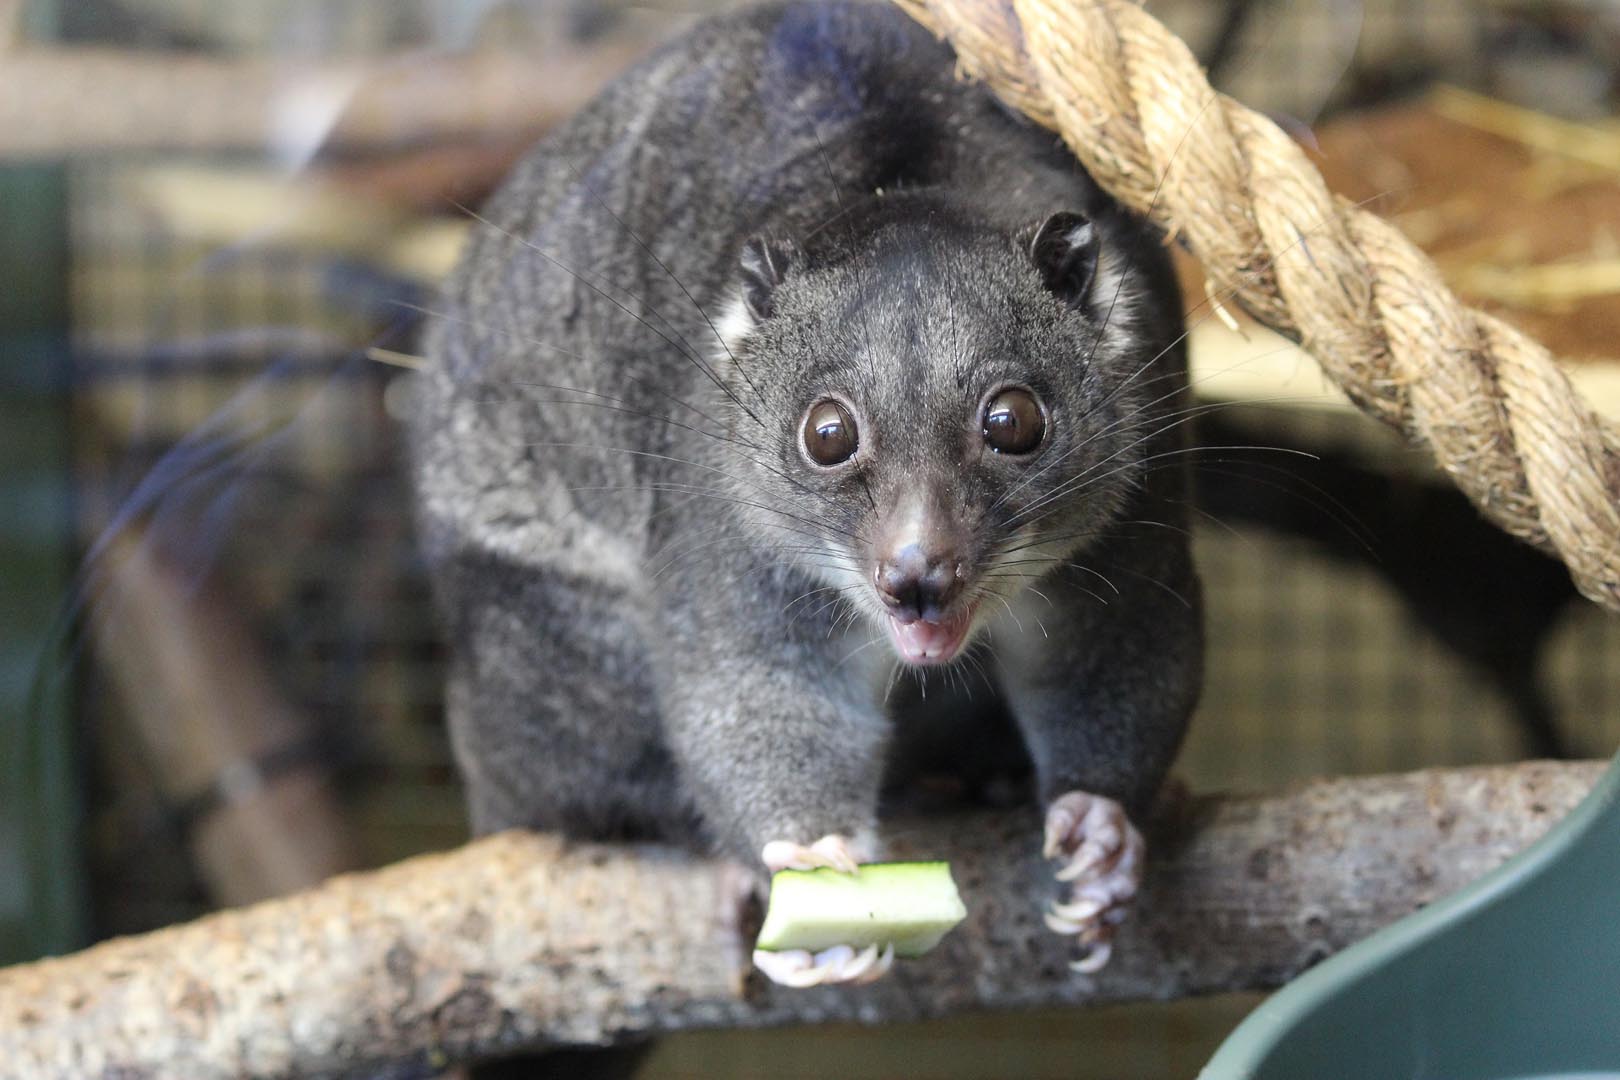 Otis ground cuscus eating courgette held in one paw with mouth open looking at camera Image: HOLLIE WATSON 2022